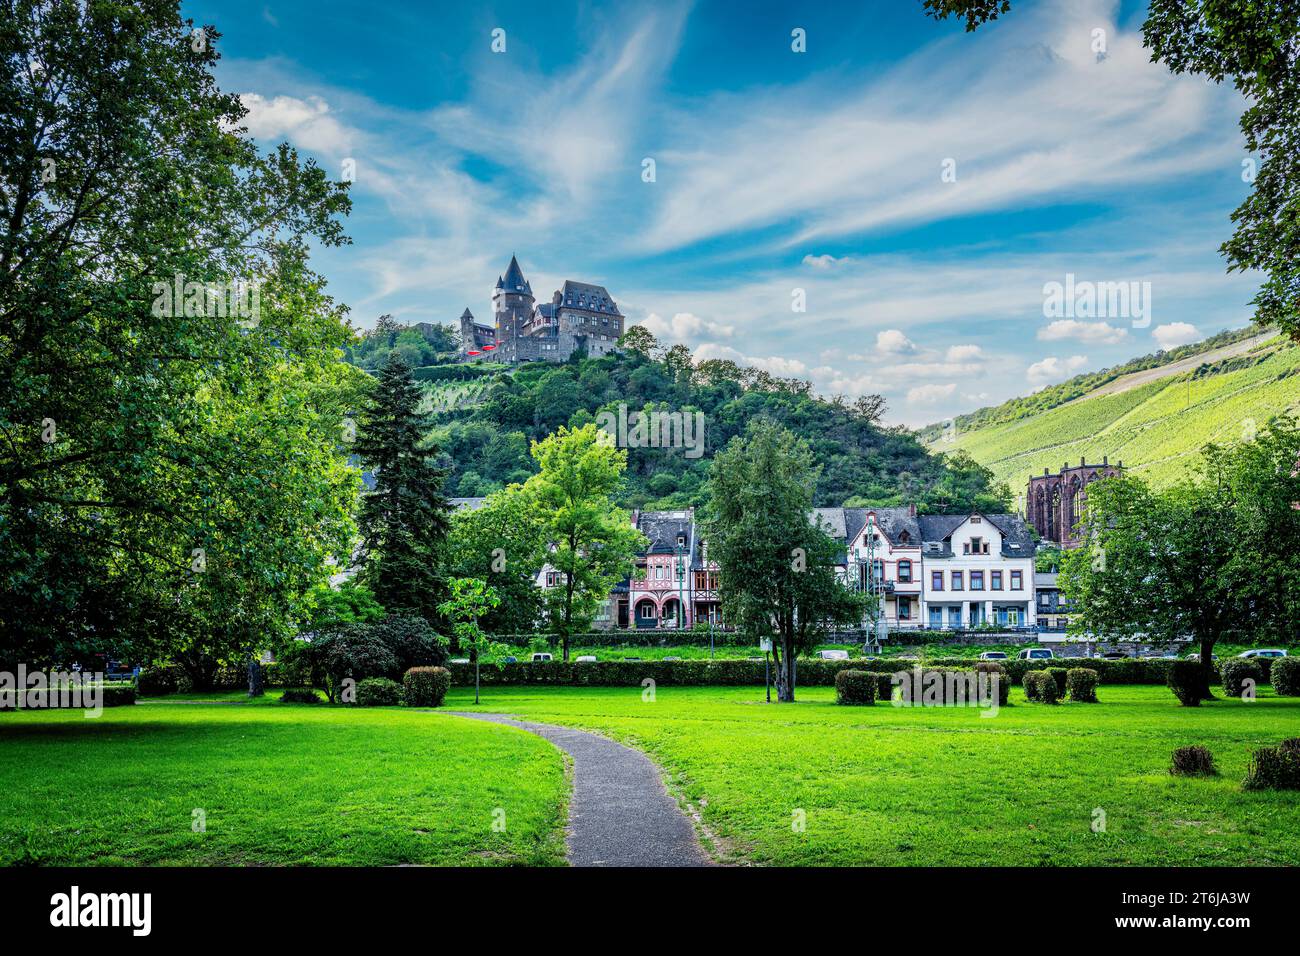 The city of Bacharach on the Middle Rhine, Stahleck Castle and several city towers frame the core city, Werner Chapel and St. Peter stand out, Stock Photo